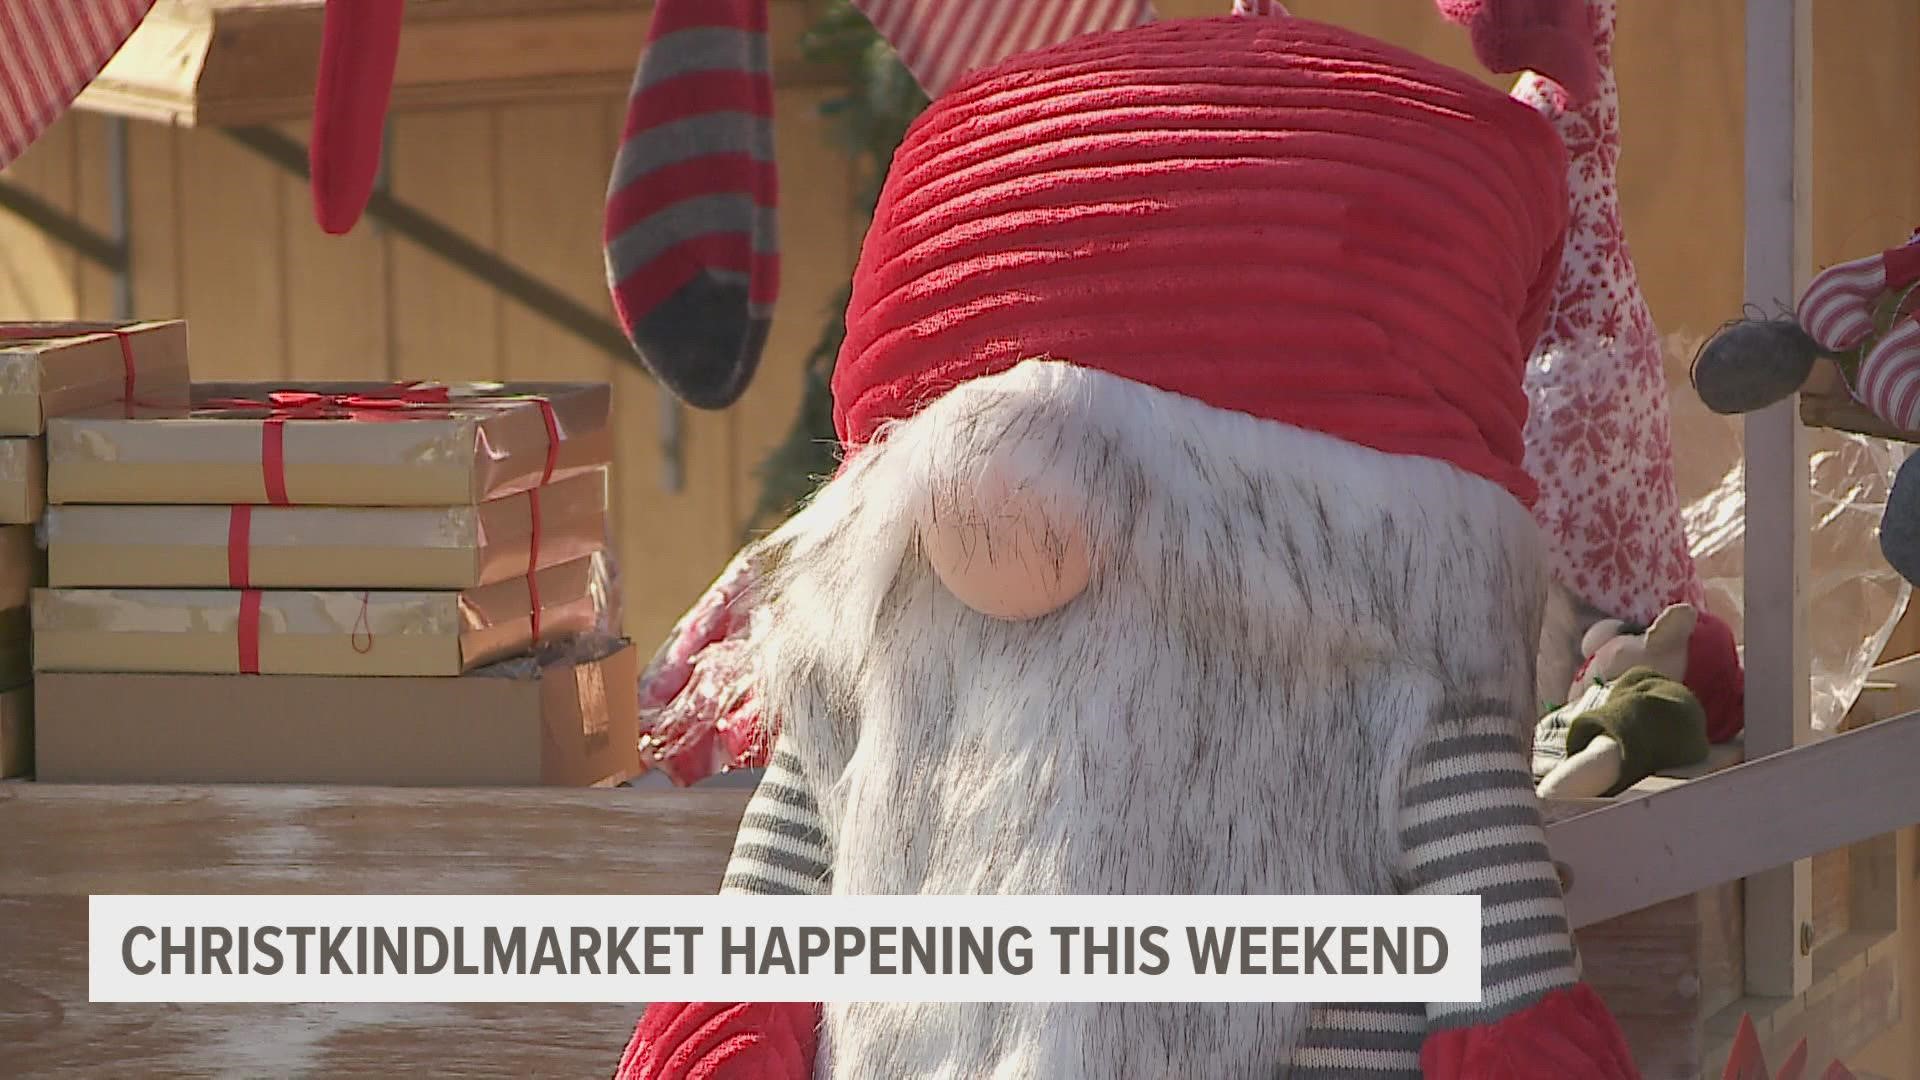 December is here! What better way to get into the holiday spirit than visiting a Christmas market? It kicks off this weekend at Principal Park.